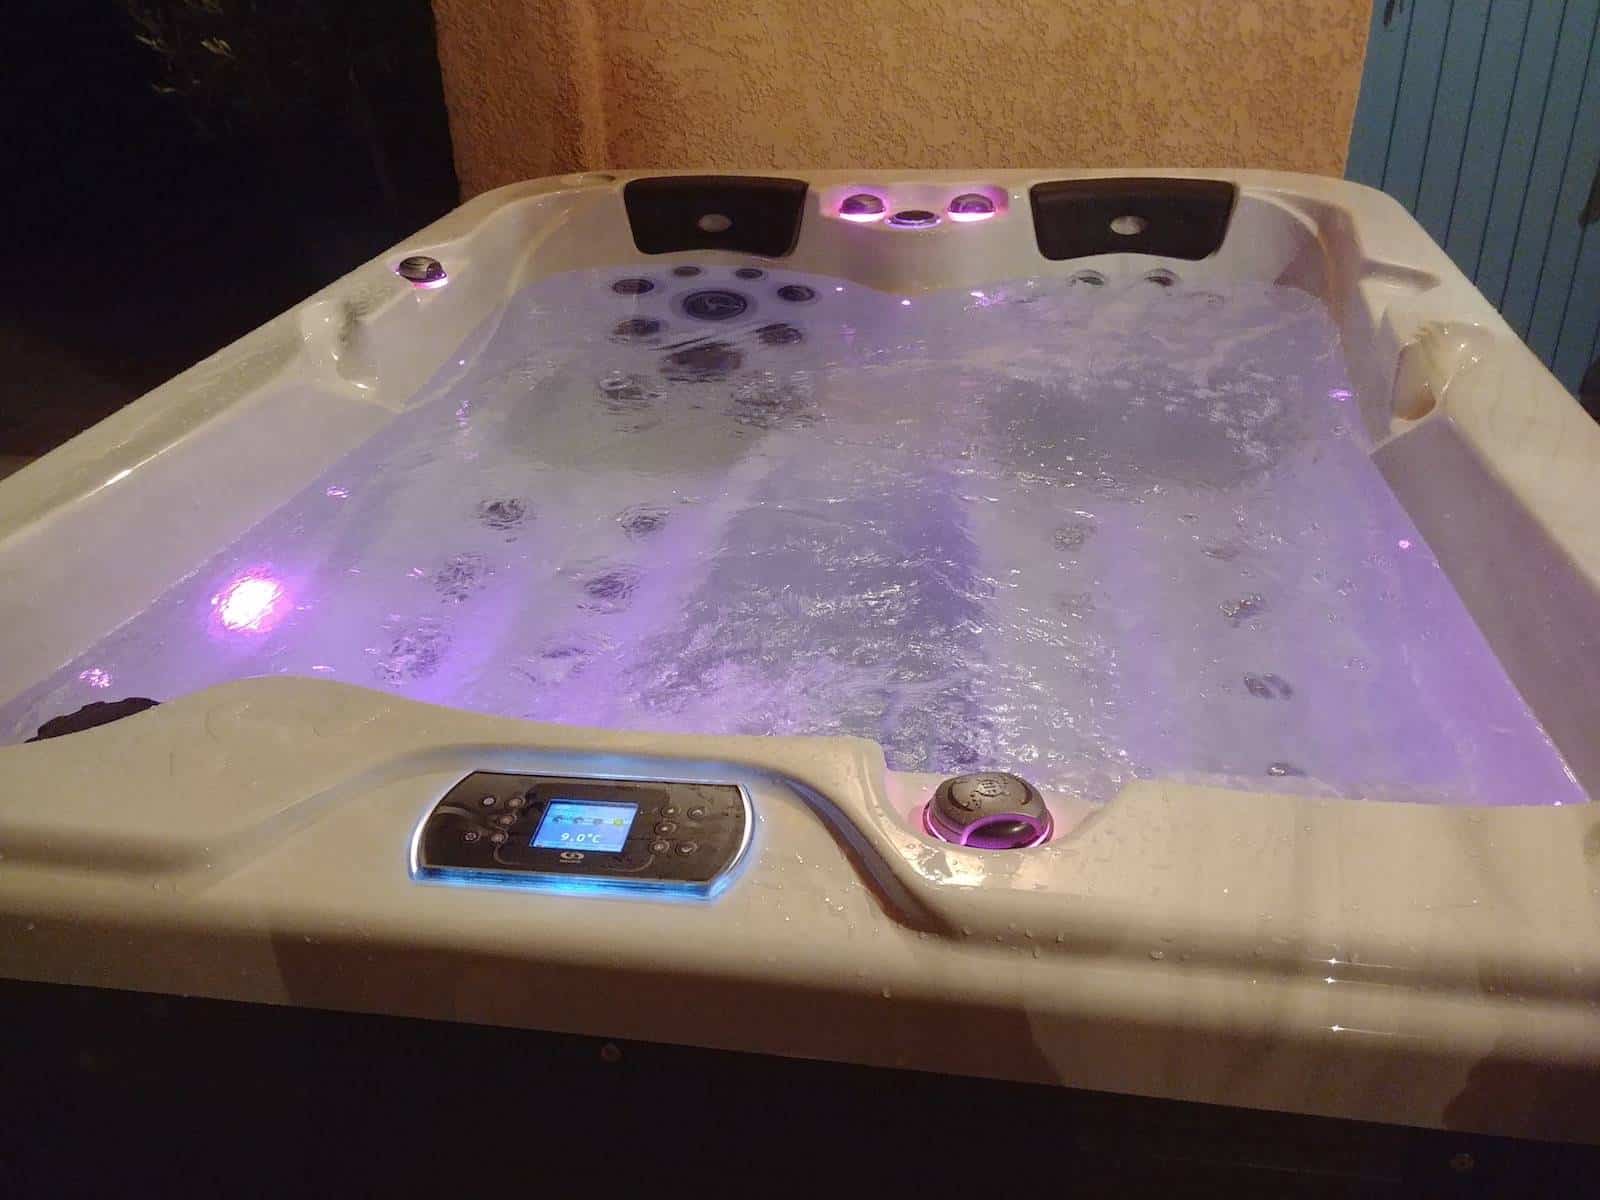 O347 Deluxe Hot tub